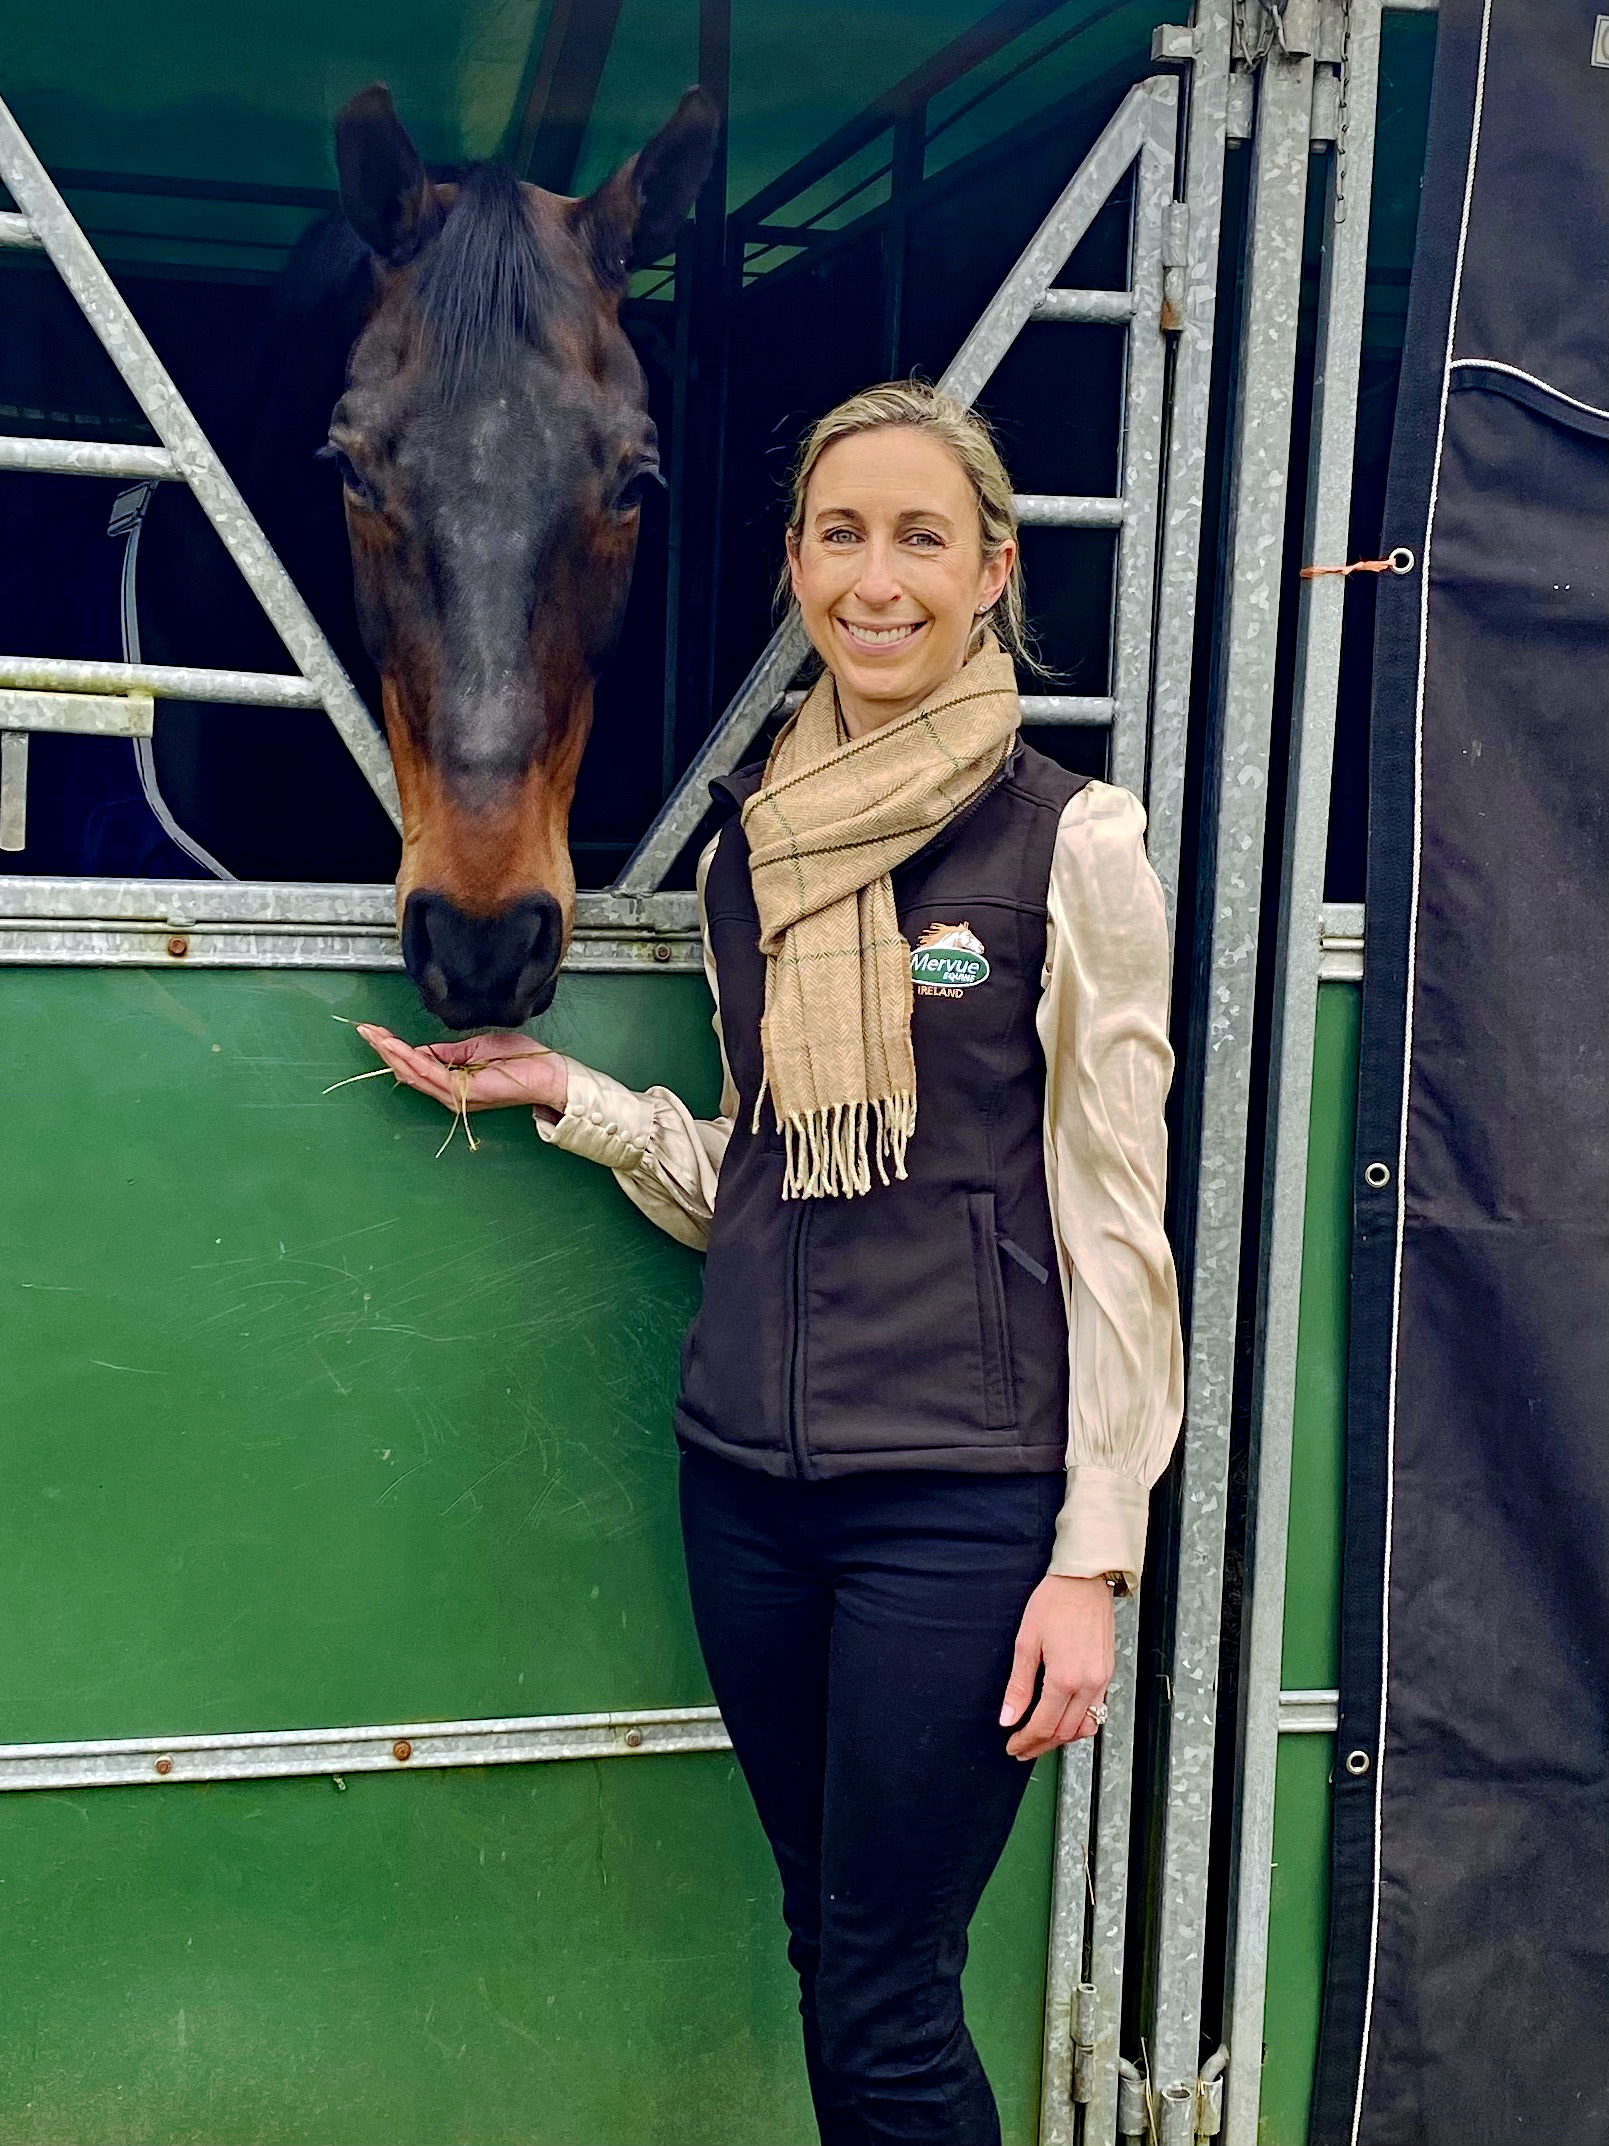 Ciara Watt pictured with horse 